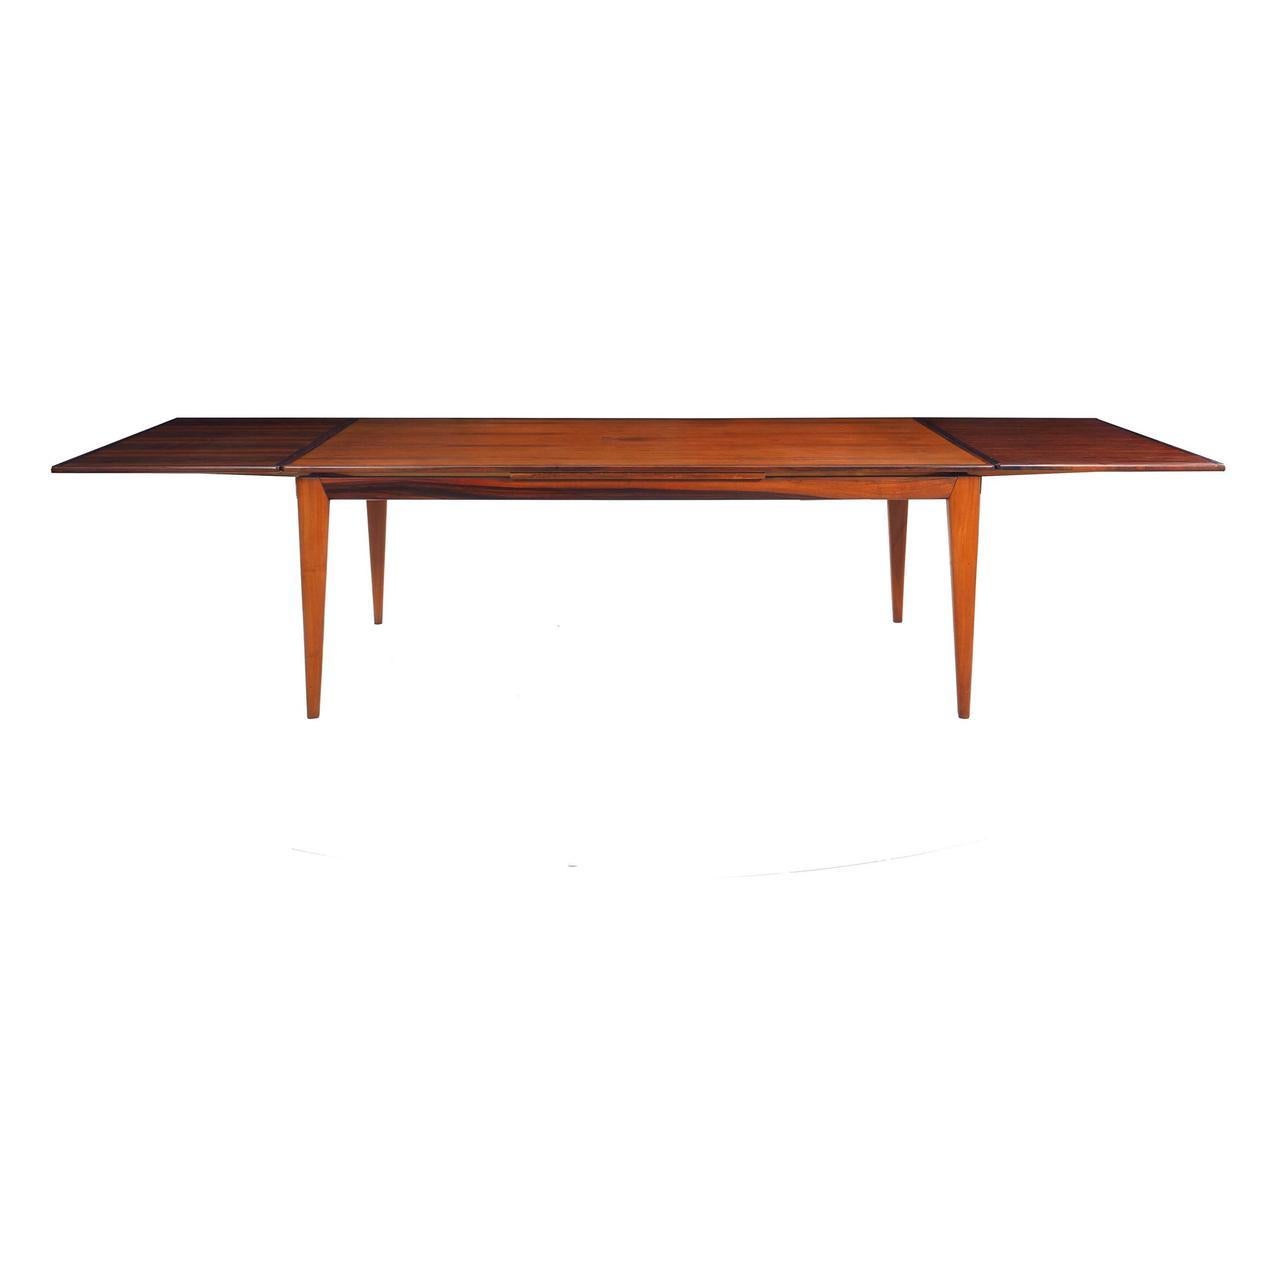 20th Century Danish Mid-Century Modern Rosewood Dining Table by Niels Møller, Model No. 254